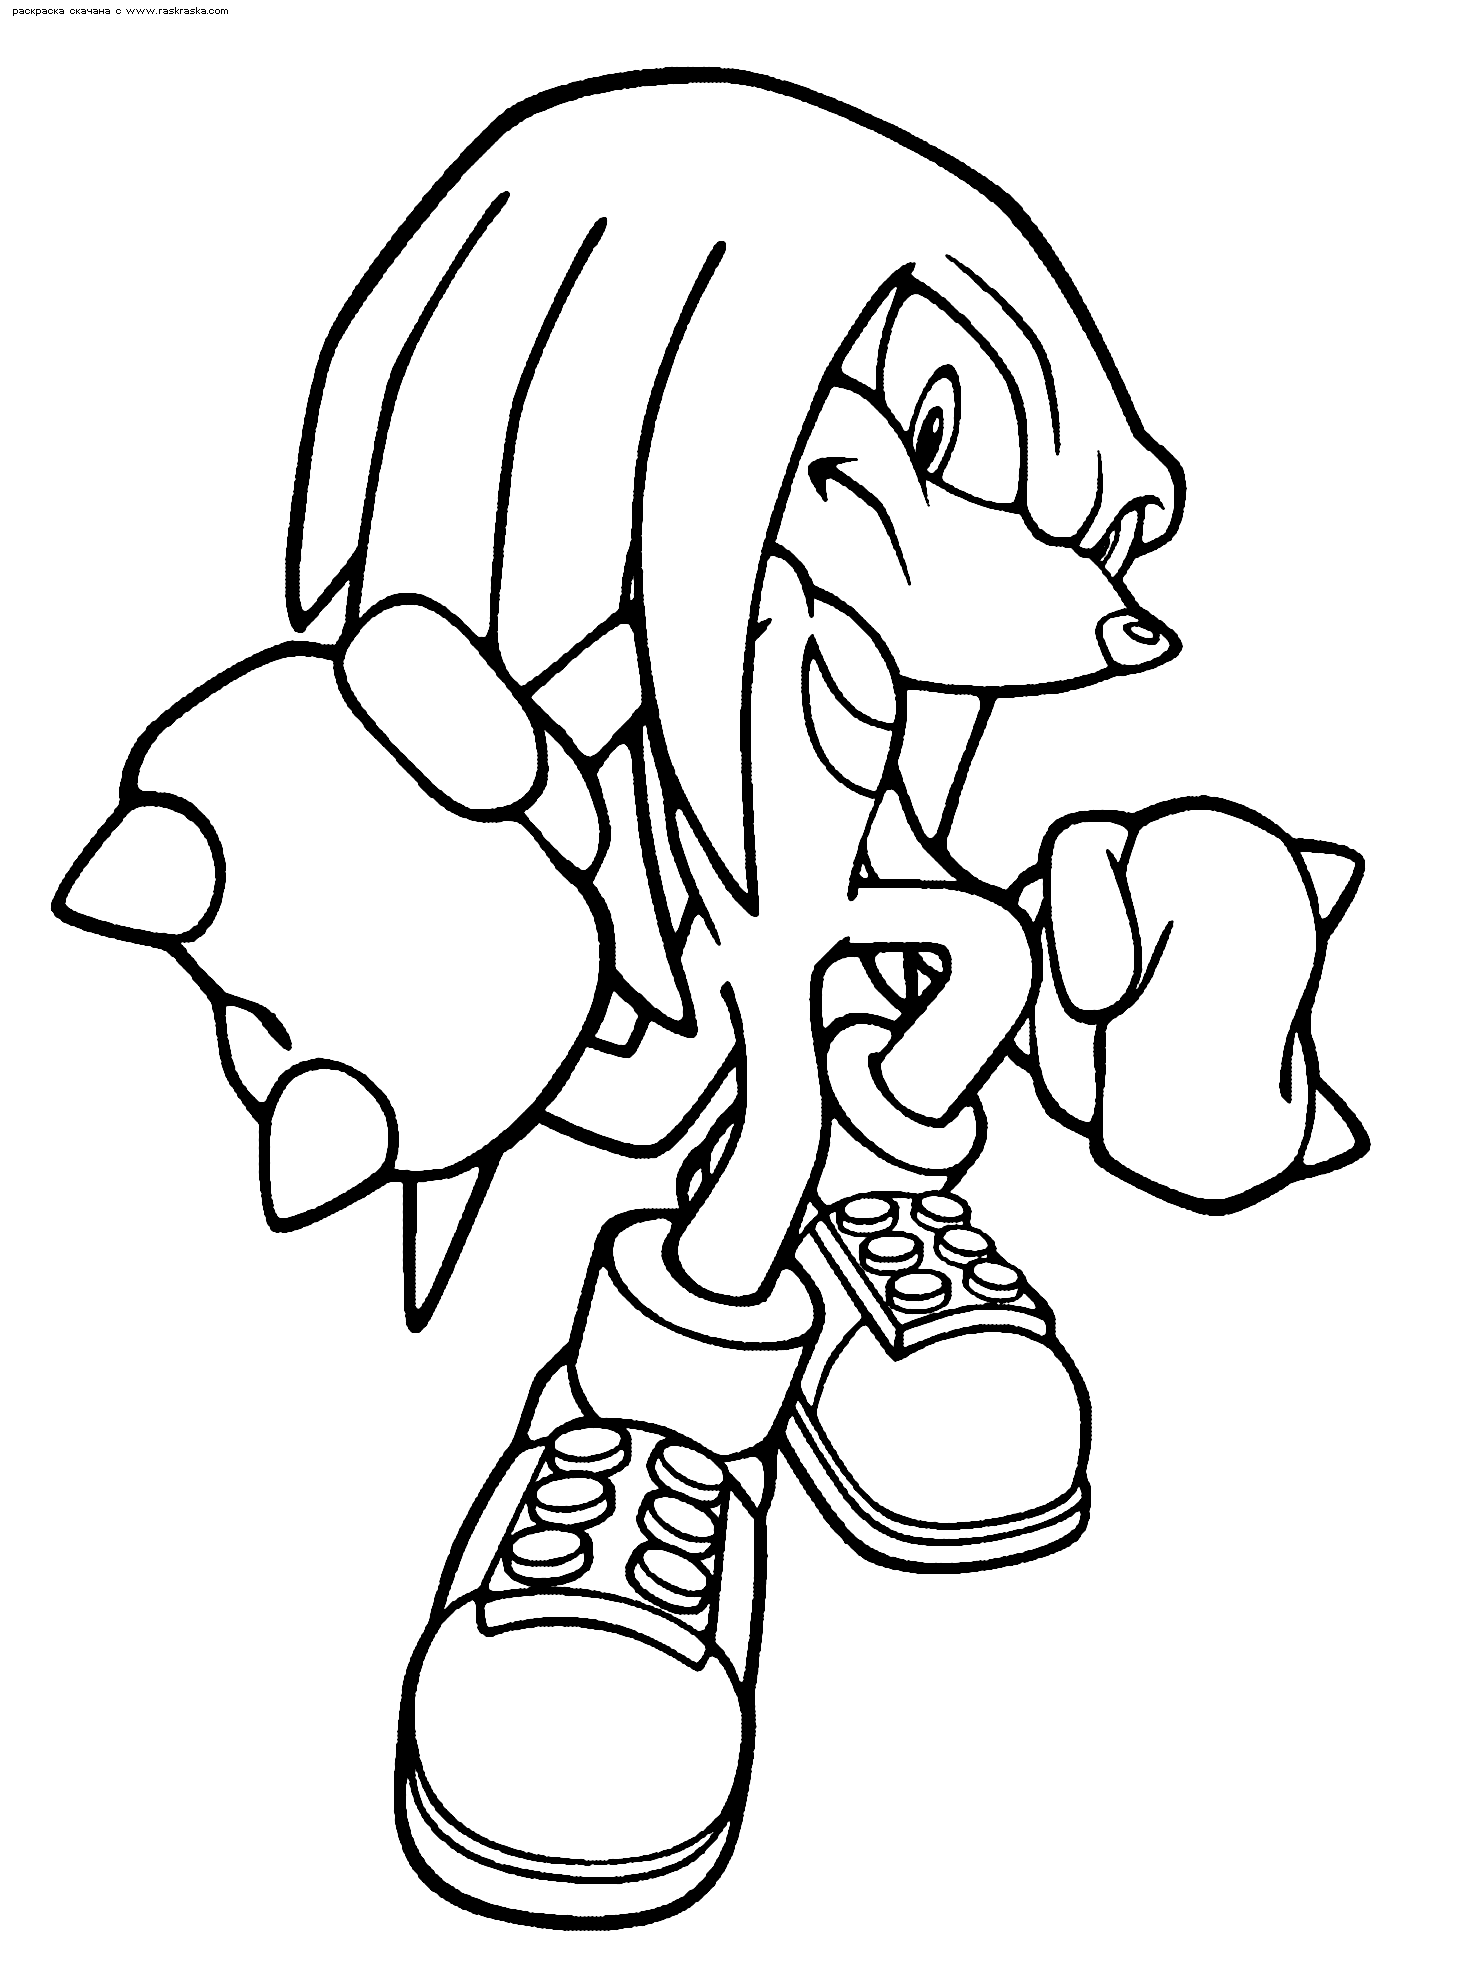 Printable Knuckles Coloring Pages - printable knuckles coloring pages